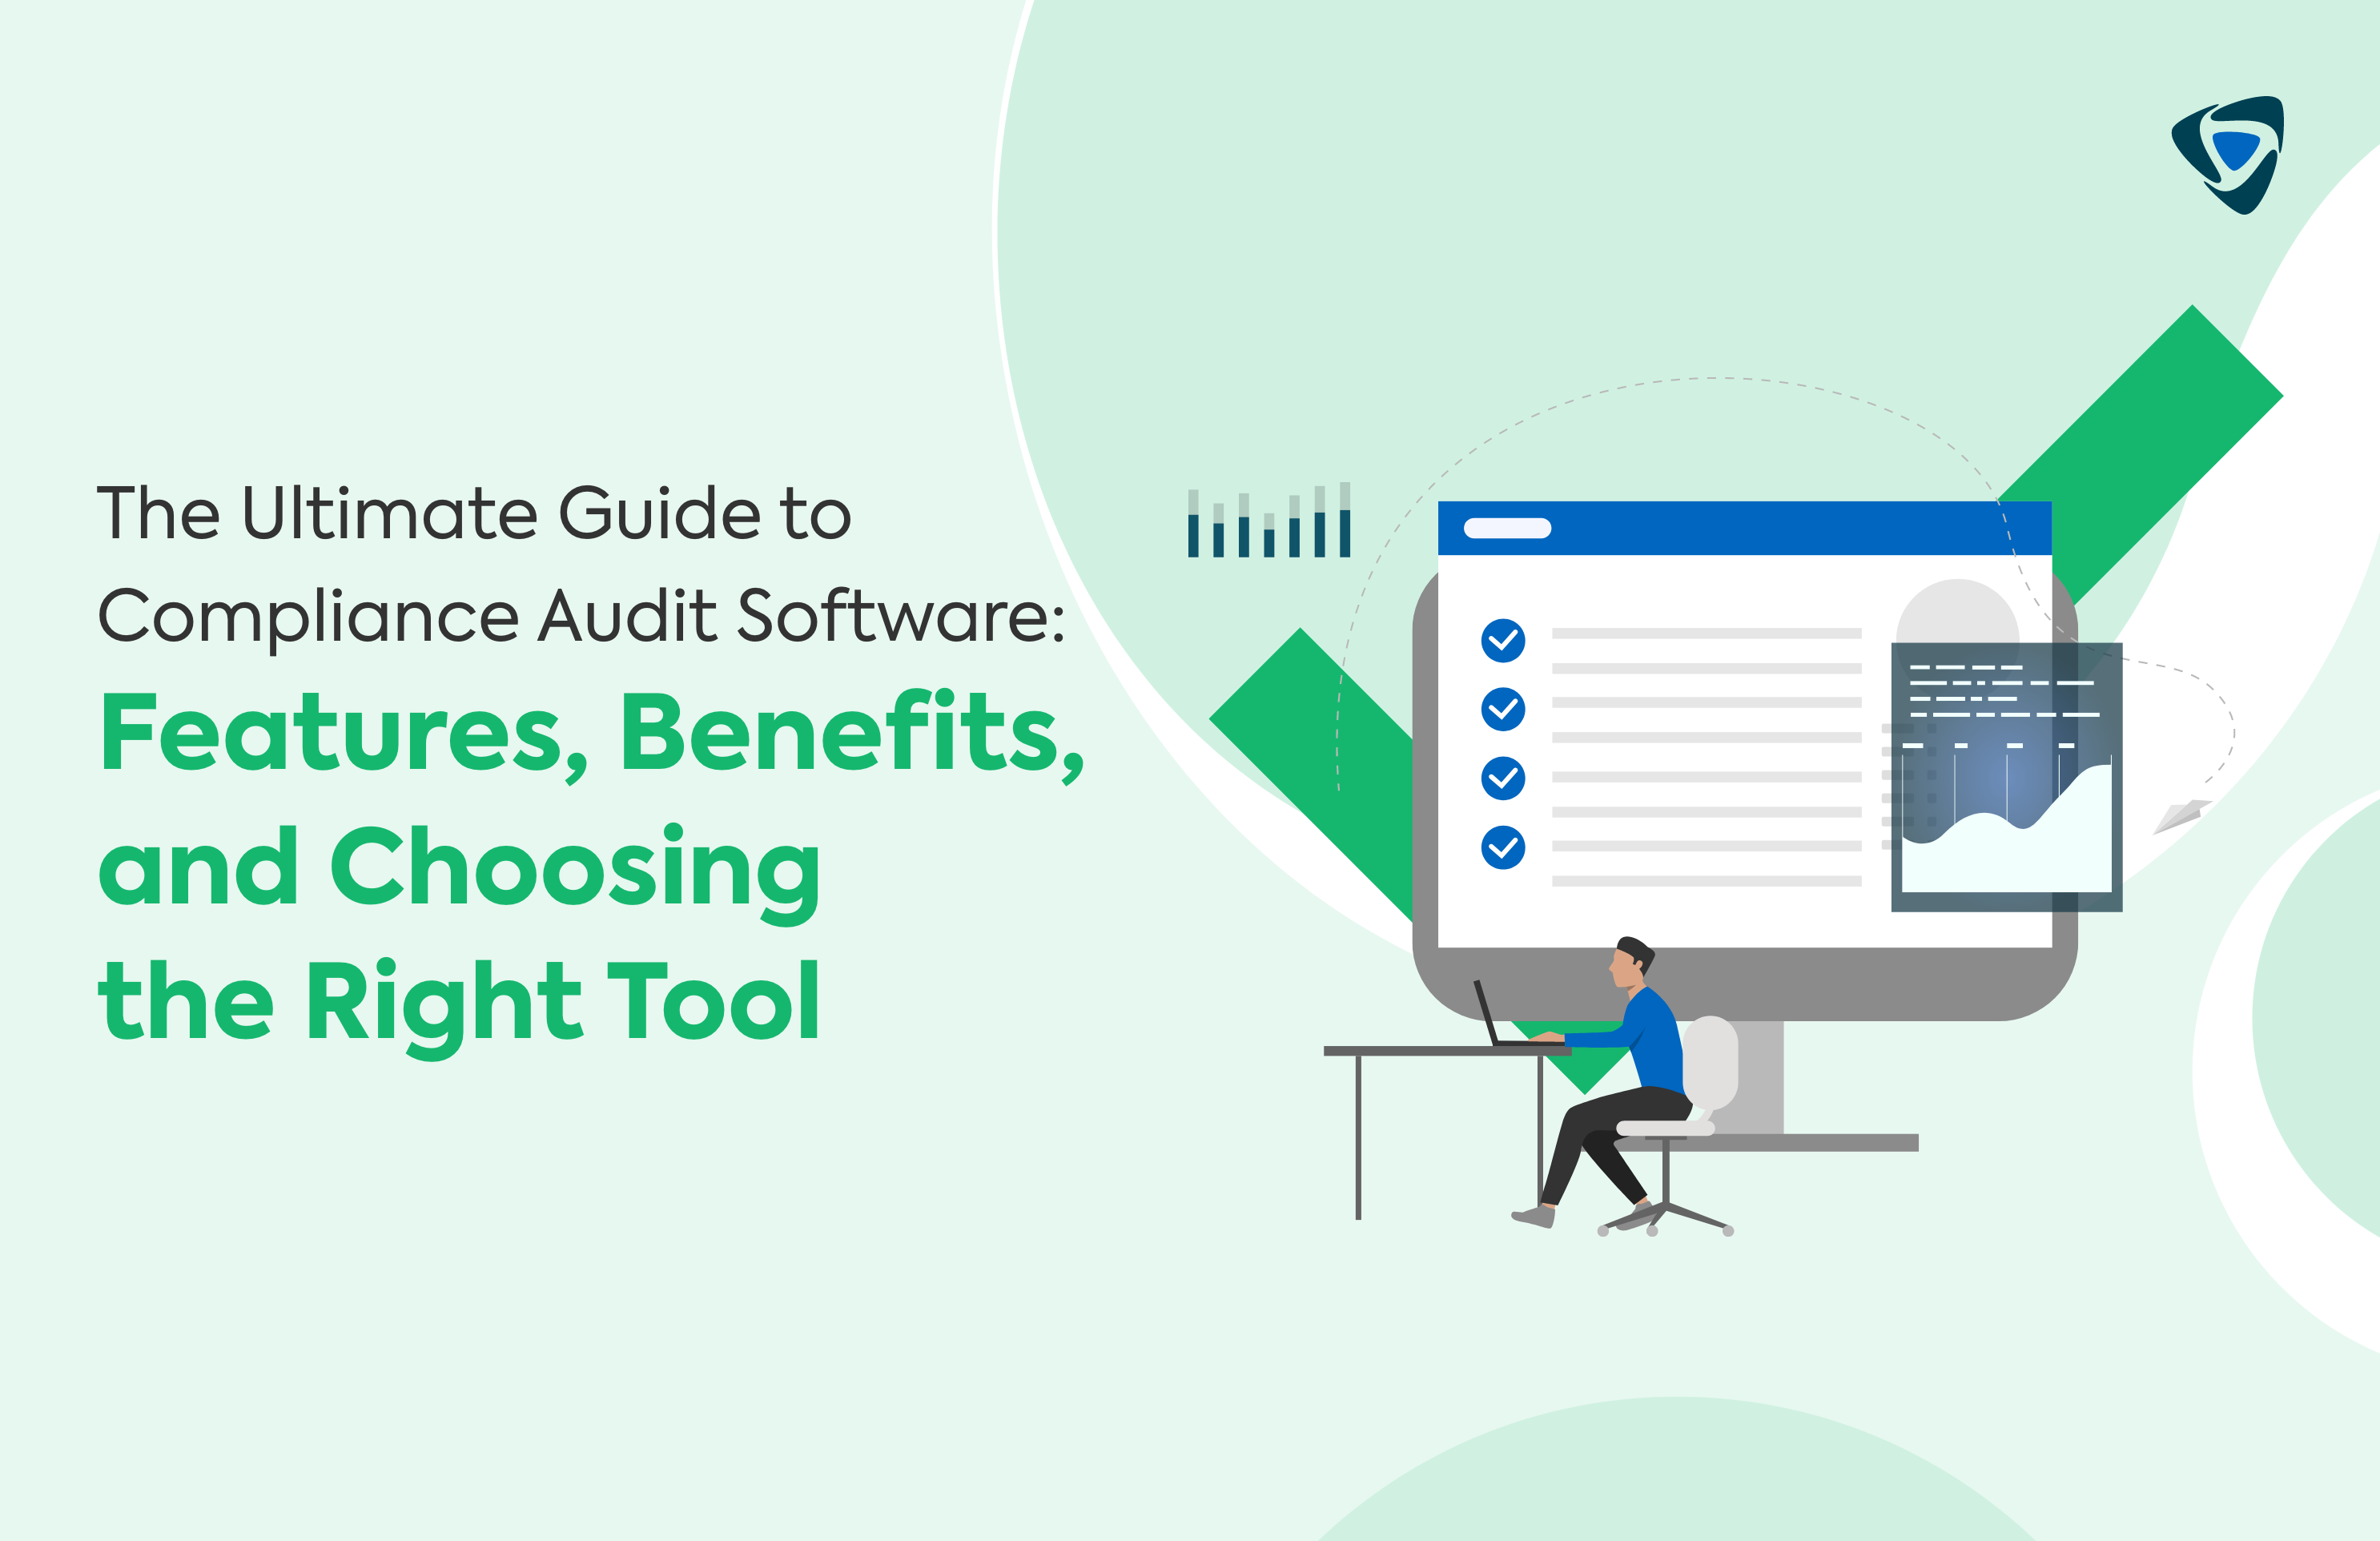 The Ultimate Guide to Compliance Audit Software: Features, Benefits, and Choosing the Right Tool